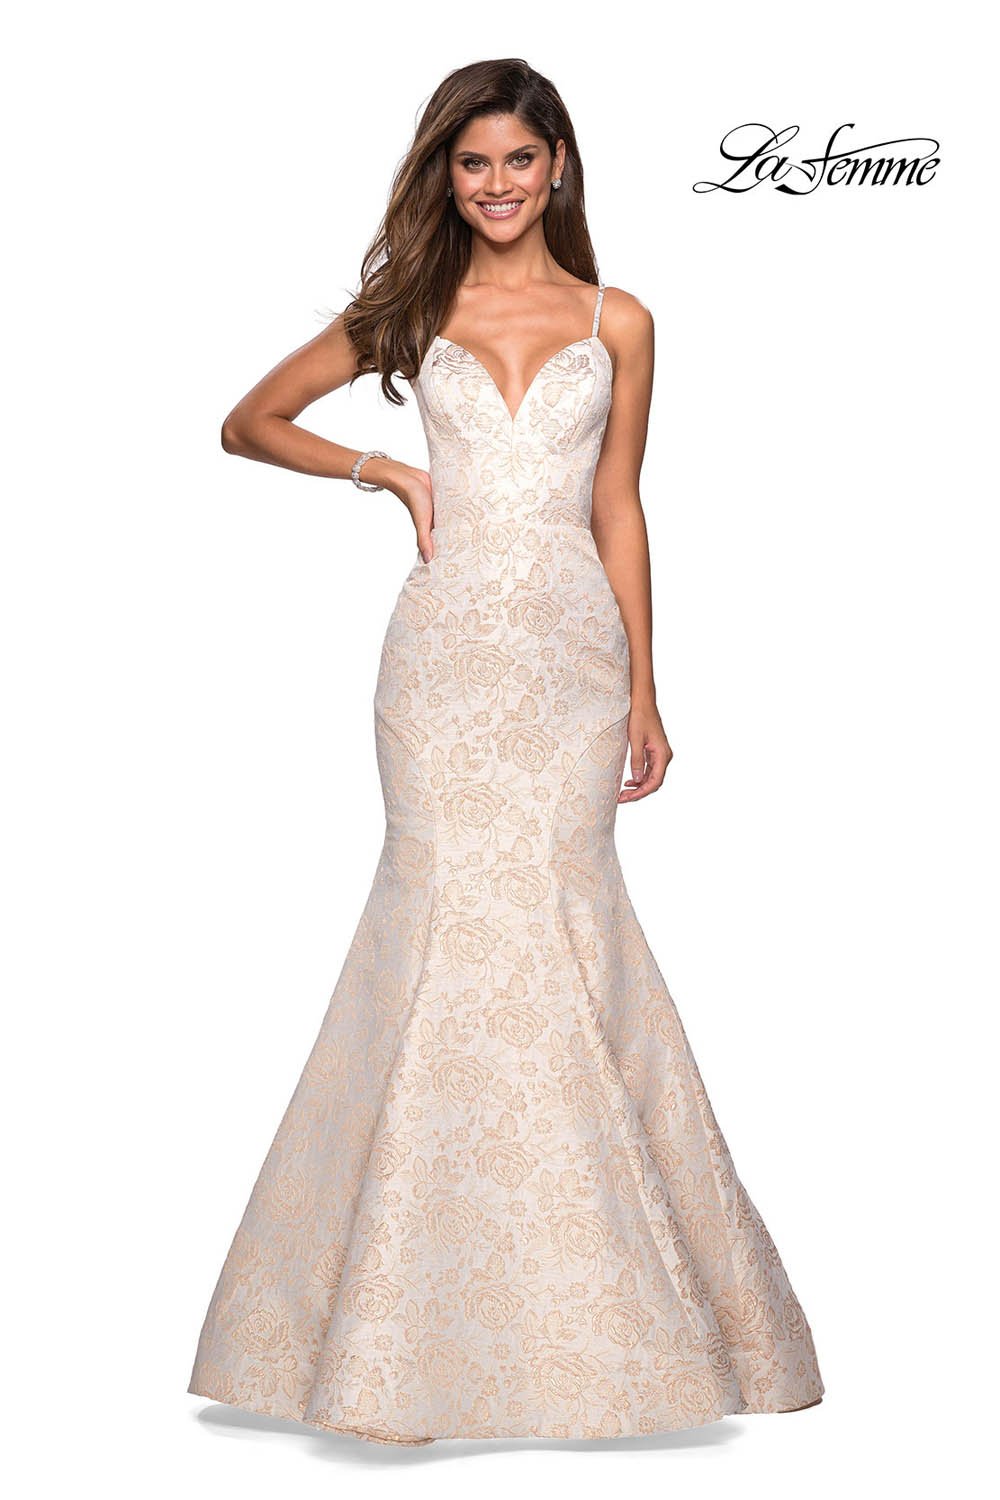 La Femme 27310 dress images in these colors: Ivory Gold.